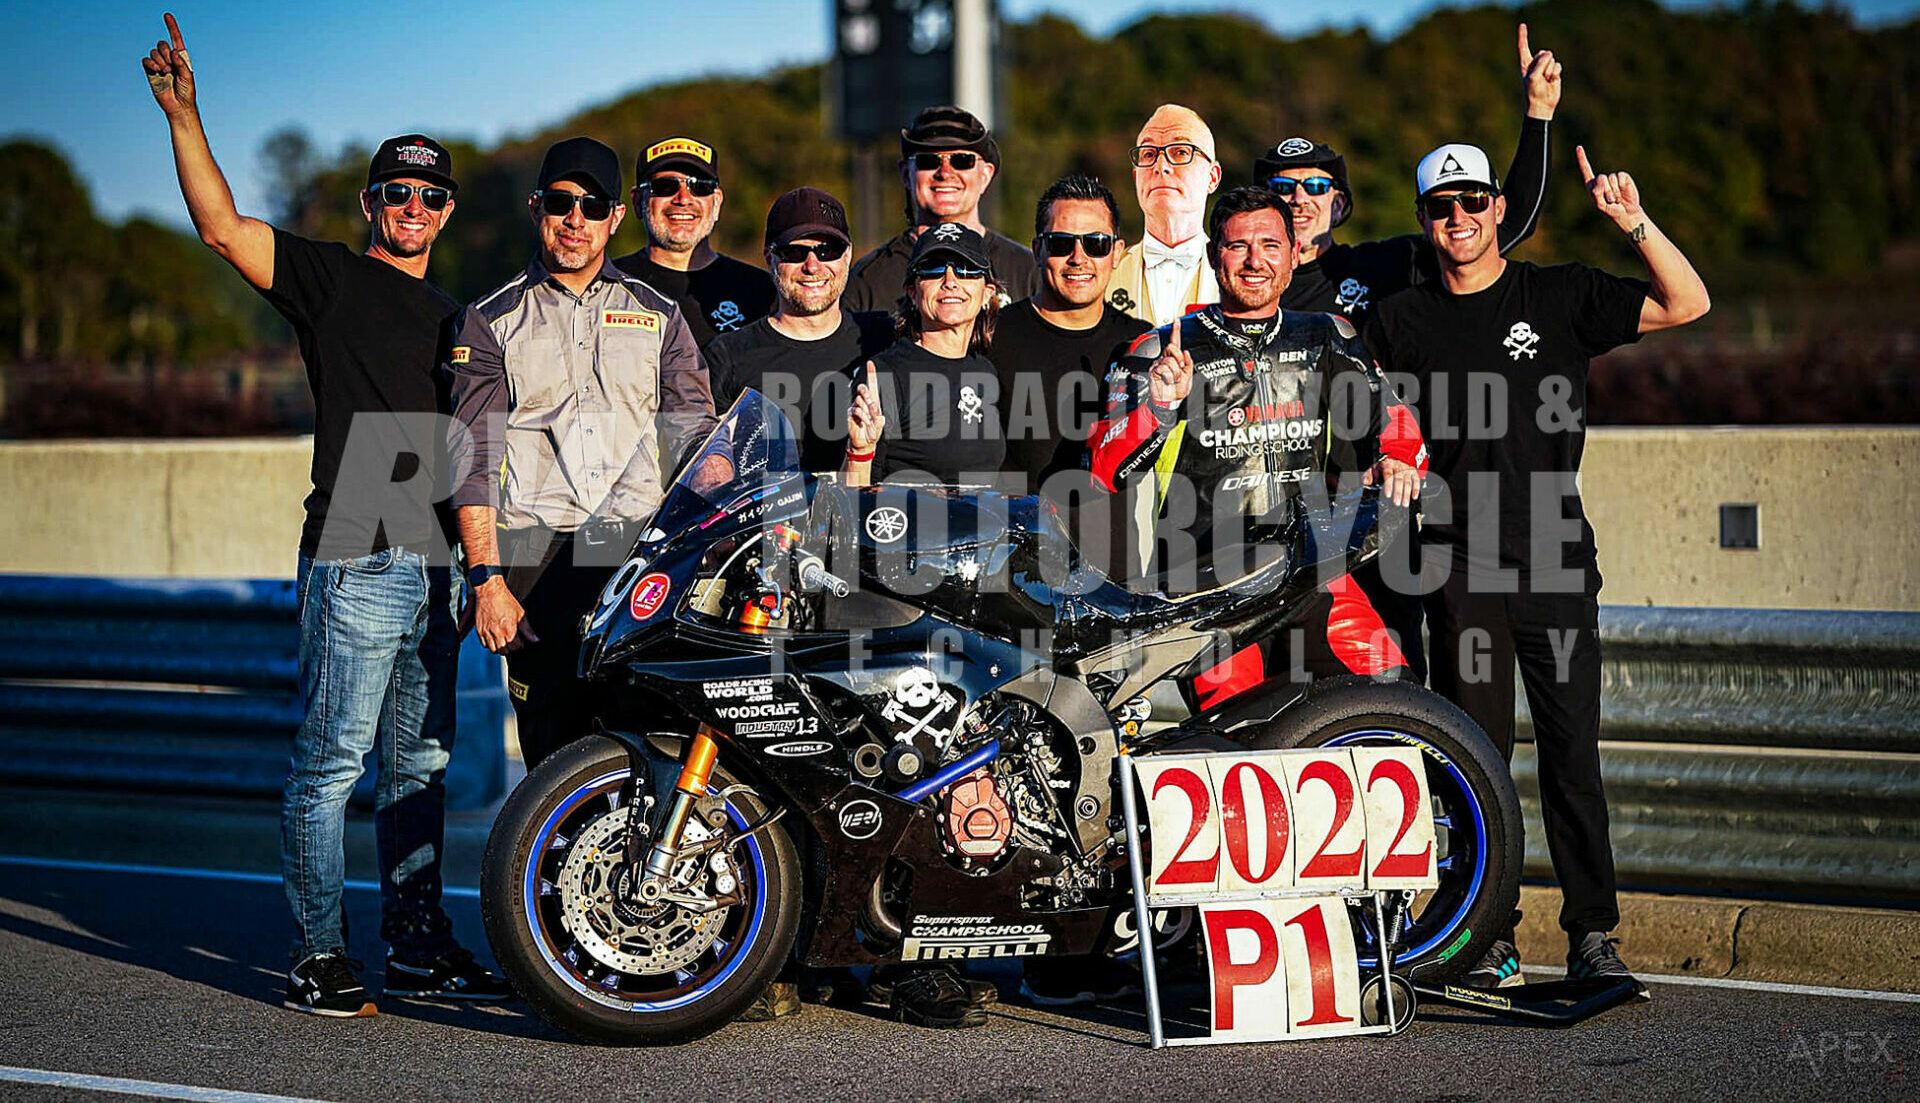 The 2022 Army of Darkness Endurance Team after securing a 19th national title. Photo by AKHughes Sports Media.